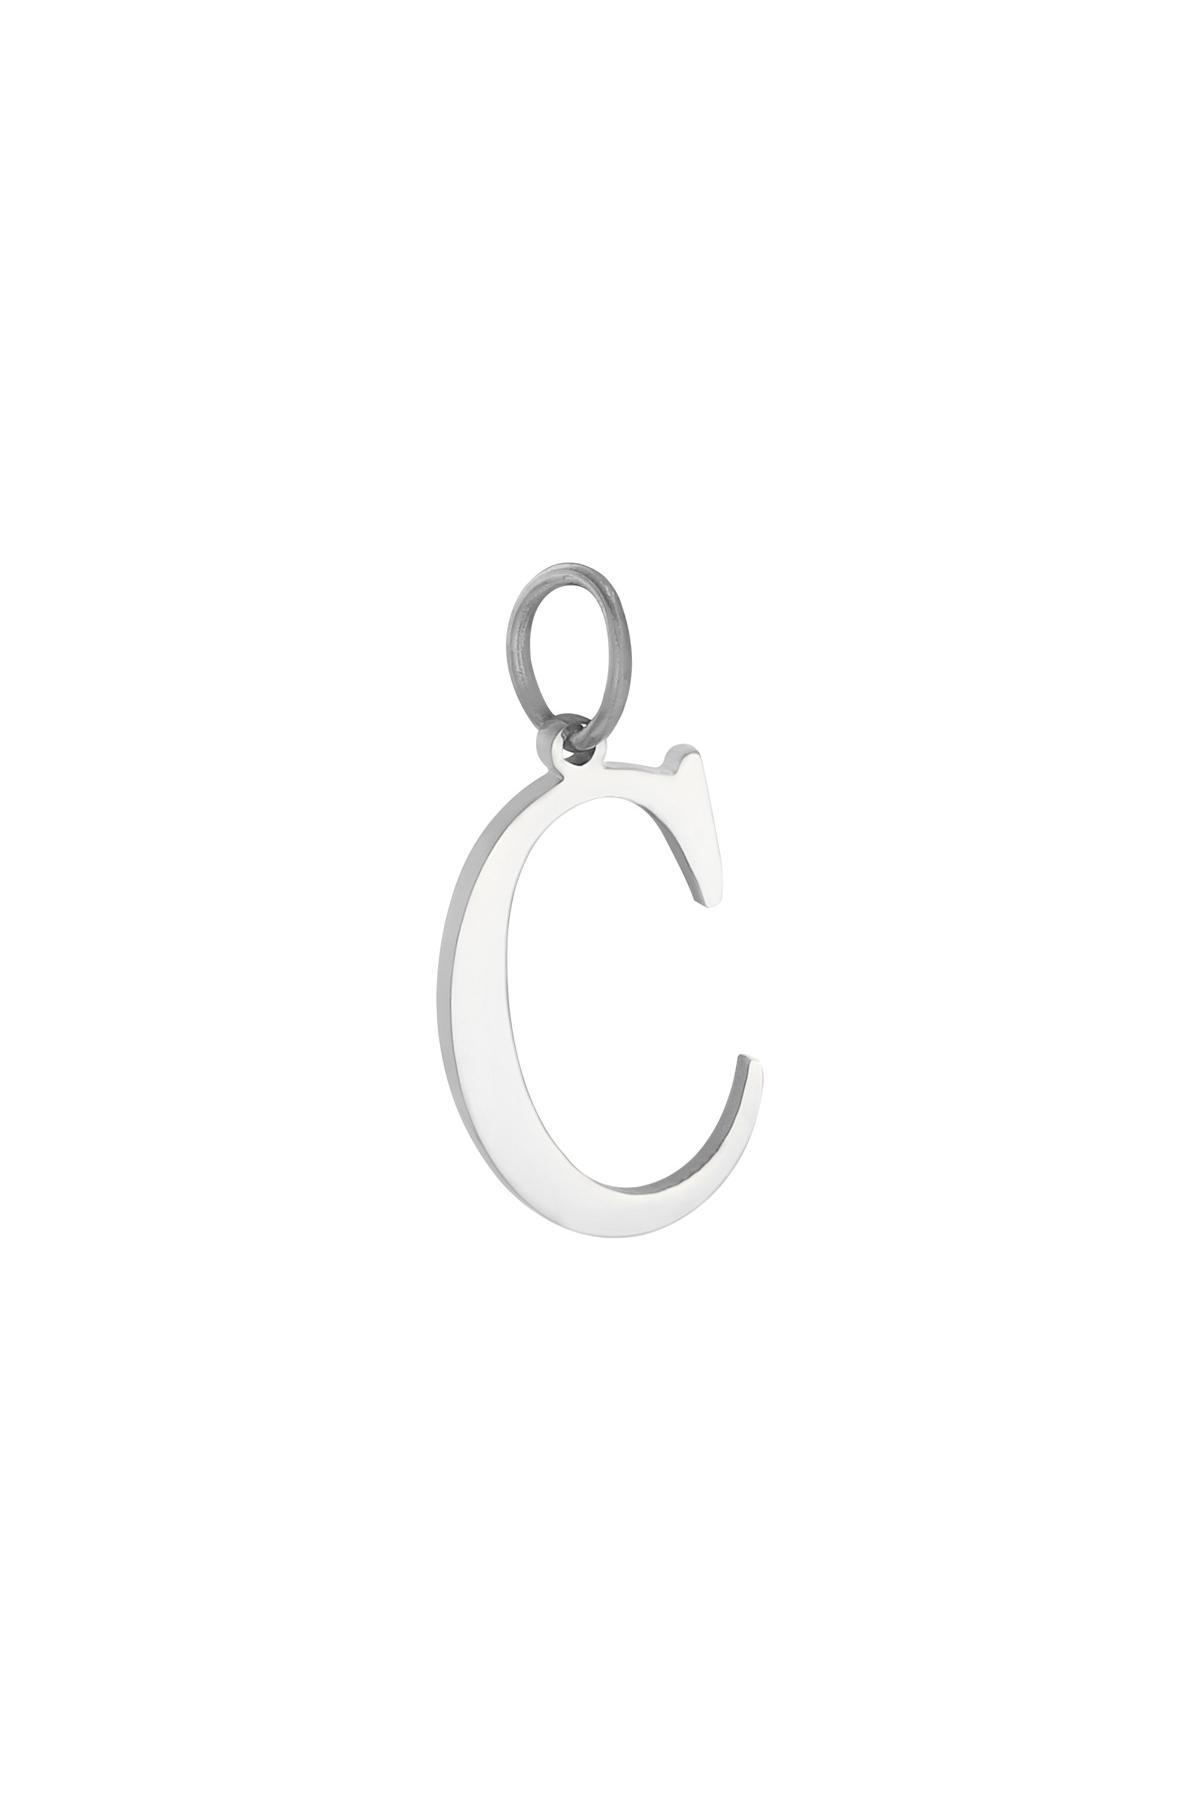 Charm C Silver Stainless Steel h5 